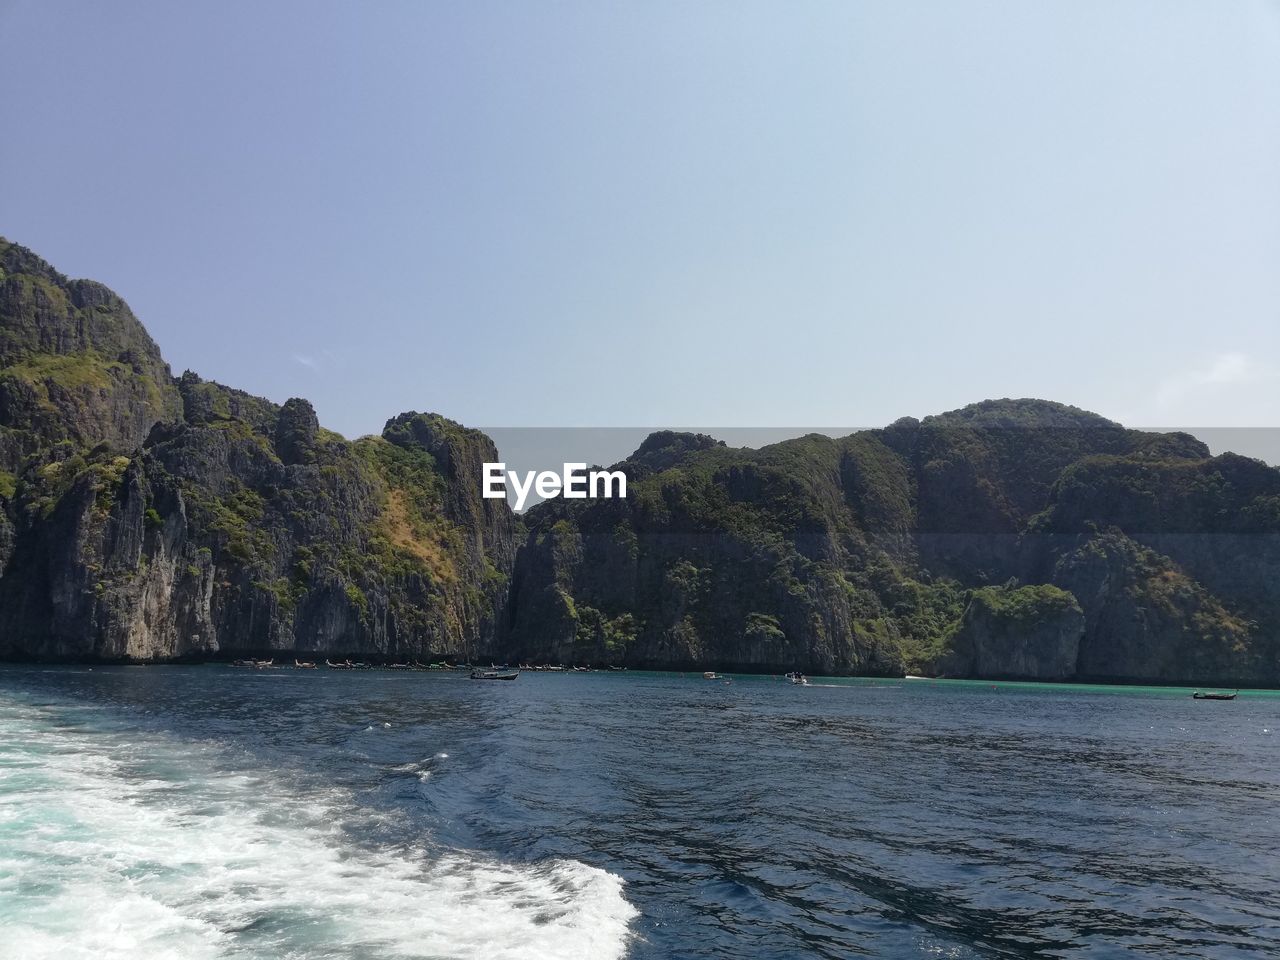 SCENIC VIEW OF SEA BY MOUNTAIN AGAINST CLEAR SKY